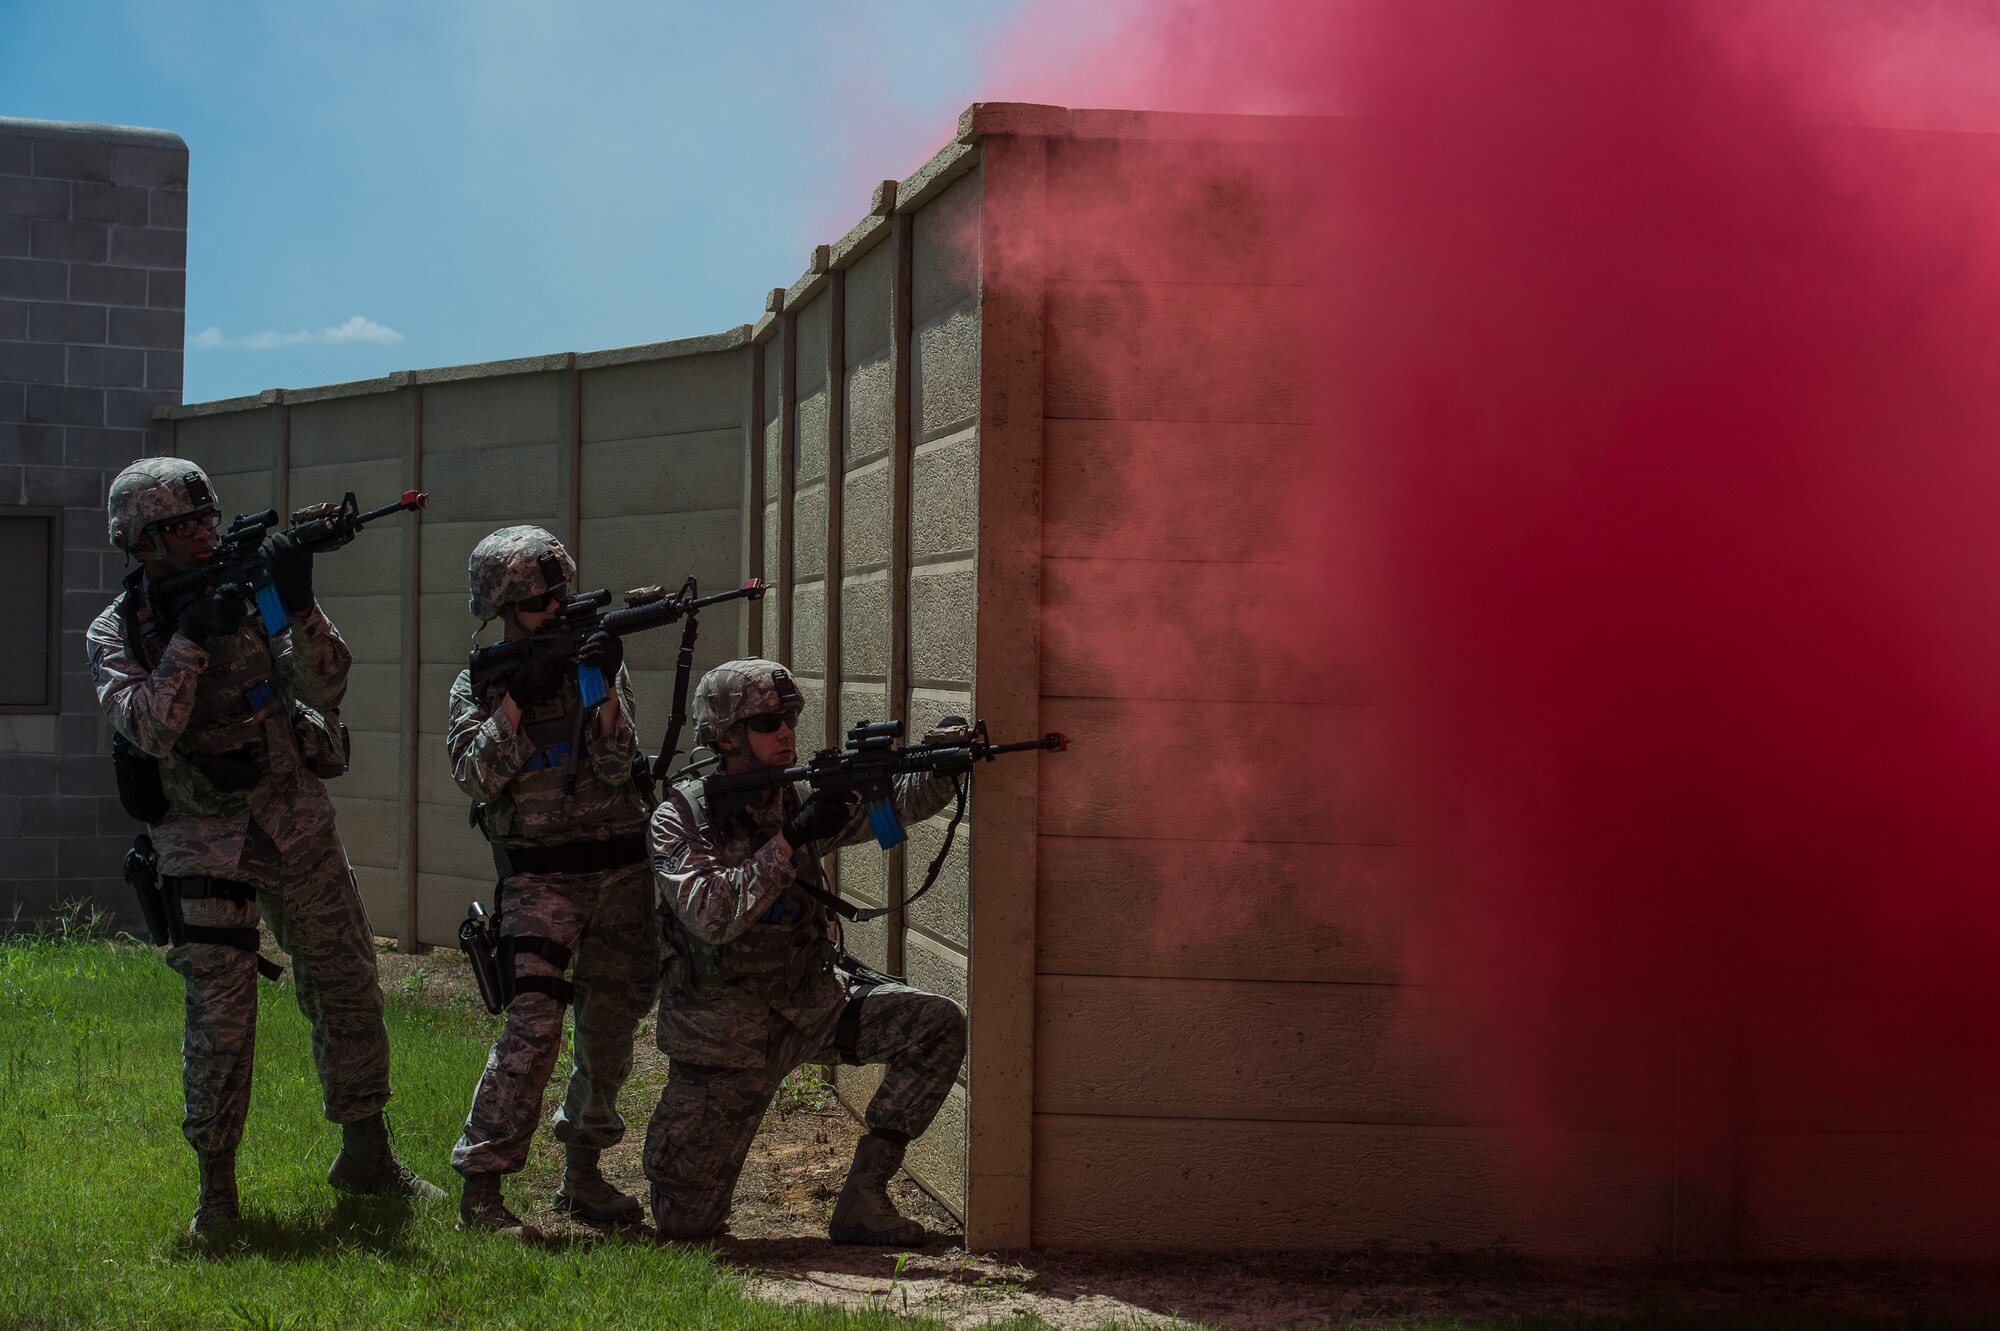 Airmen with the 137th Security Forces Squadron engage a target at Camp Gruber Training Center near Braggs, Okla., Aug. 3, 2016.  Approximately 40 members of the 137 SFS completed annual training from July 29 to Aug, 5, 2016. Airmen participated in extensive training exercises including close combat, weapons, military operations on urban terrain and navigation. (U.S. Air National Guard photo by Senior Airman Tyler Woodward/Released)